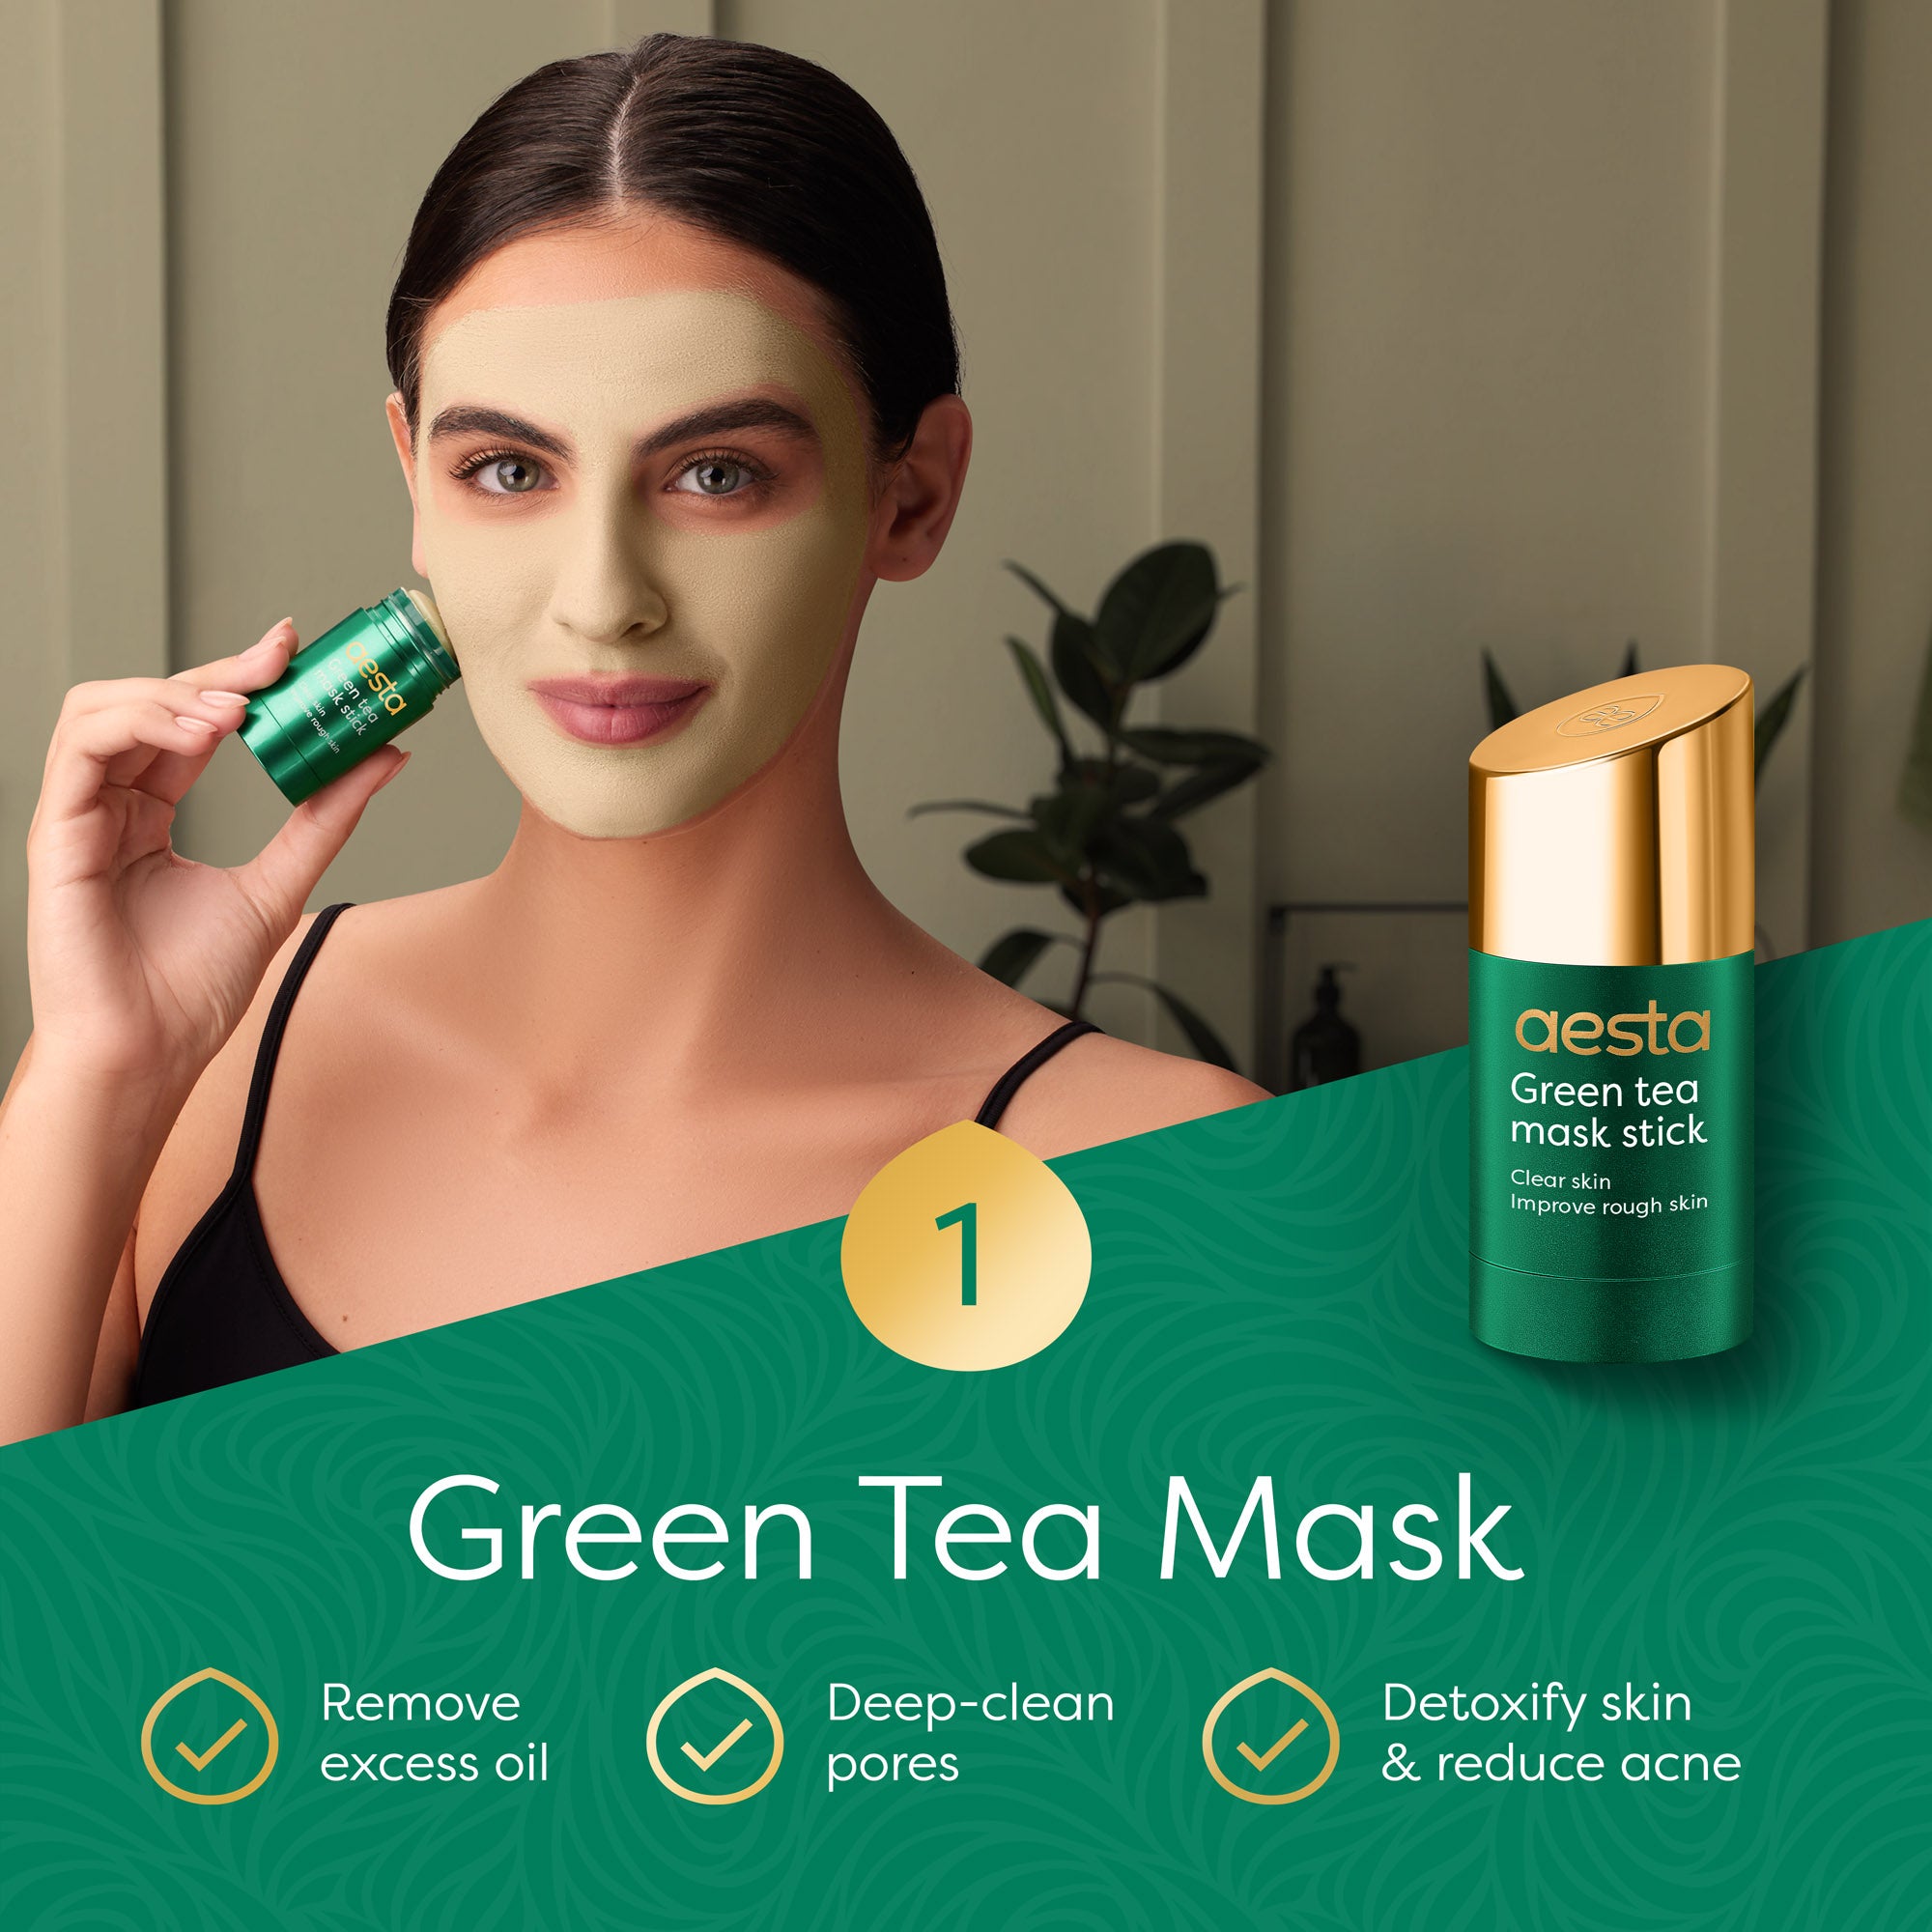 Aesta Green Tea Mask Stick + Hyaluronic Acid Serum for Face Treatment | Gradual Blackhead Remover | Pore-Cleaning, Detoxifying Face Mask, Skin Care Face Serum w/ Anti Aging and Anti Wrinkle Effects